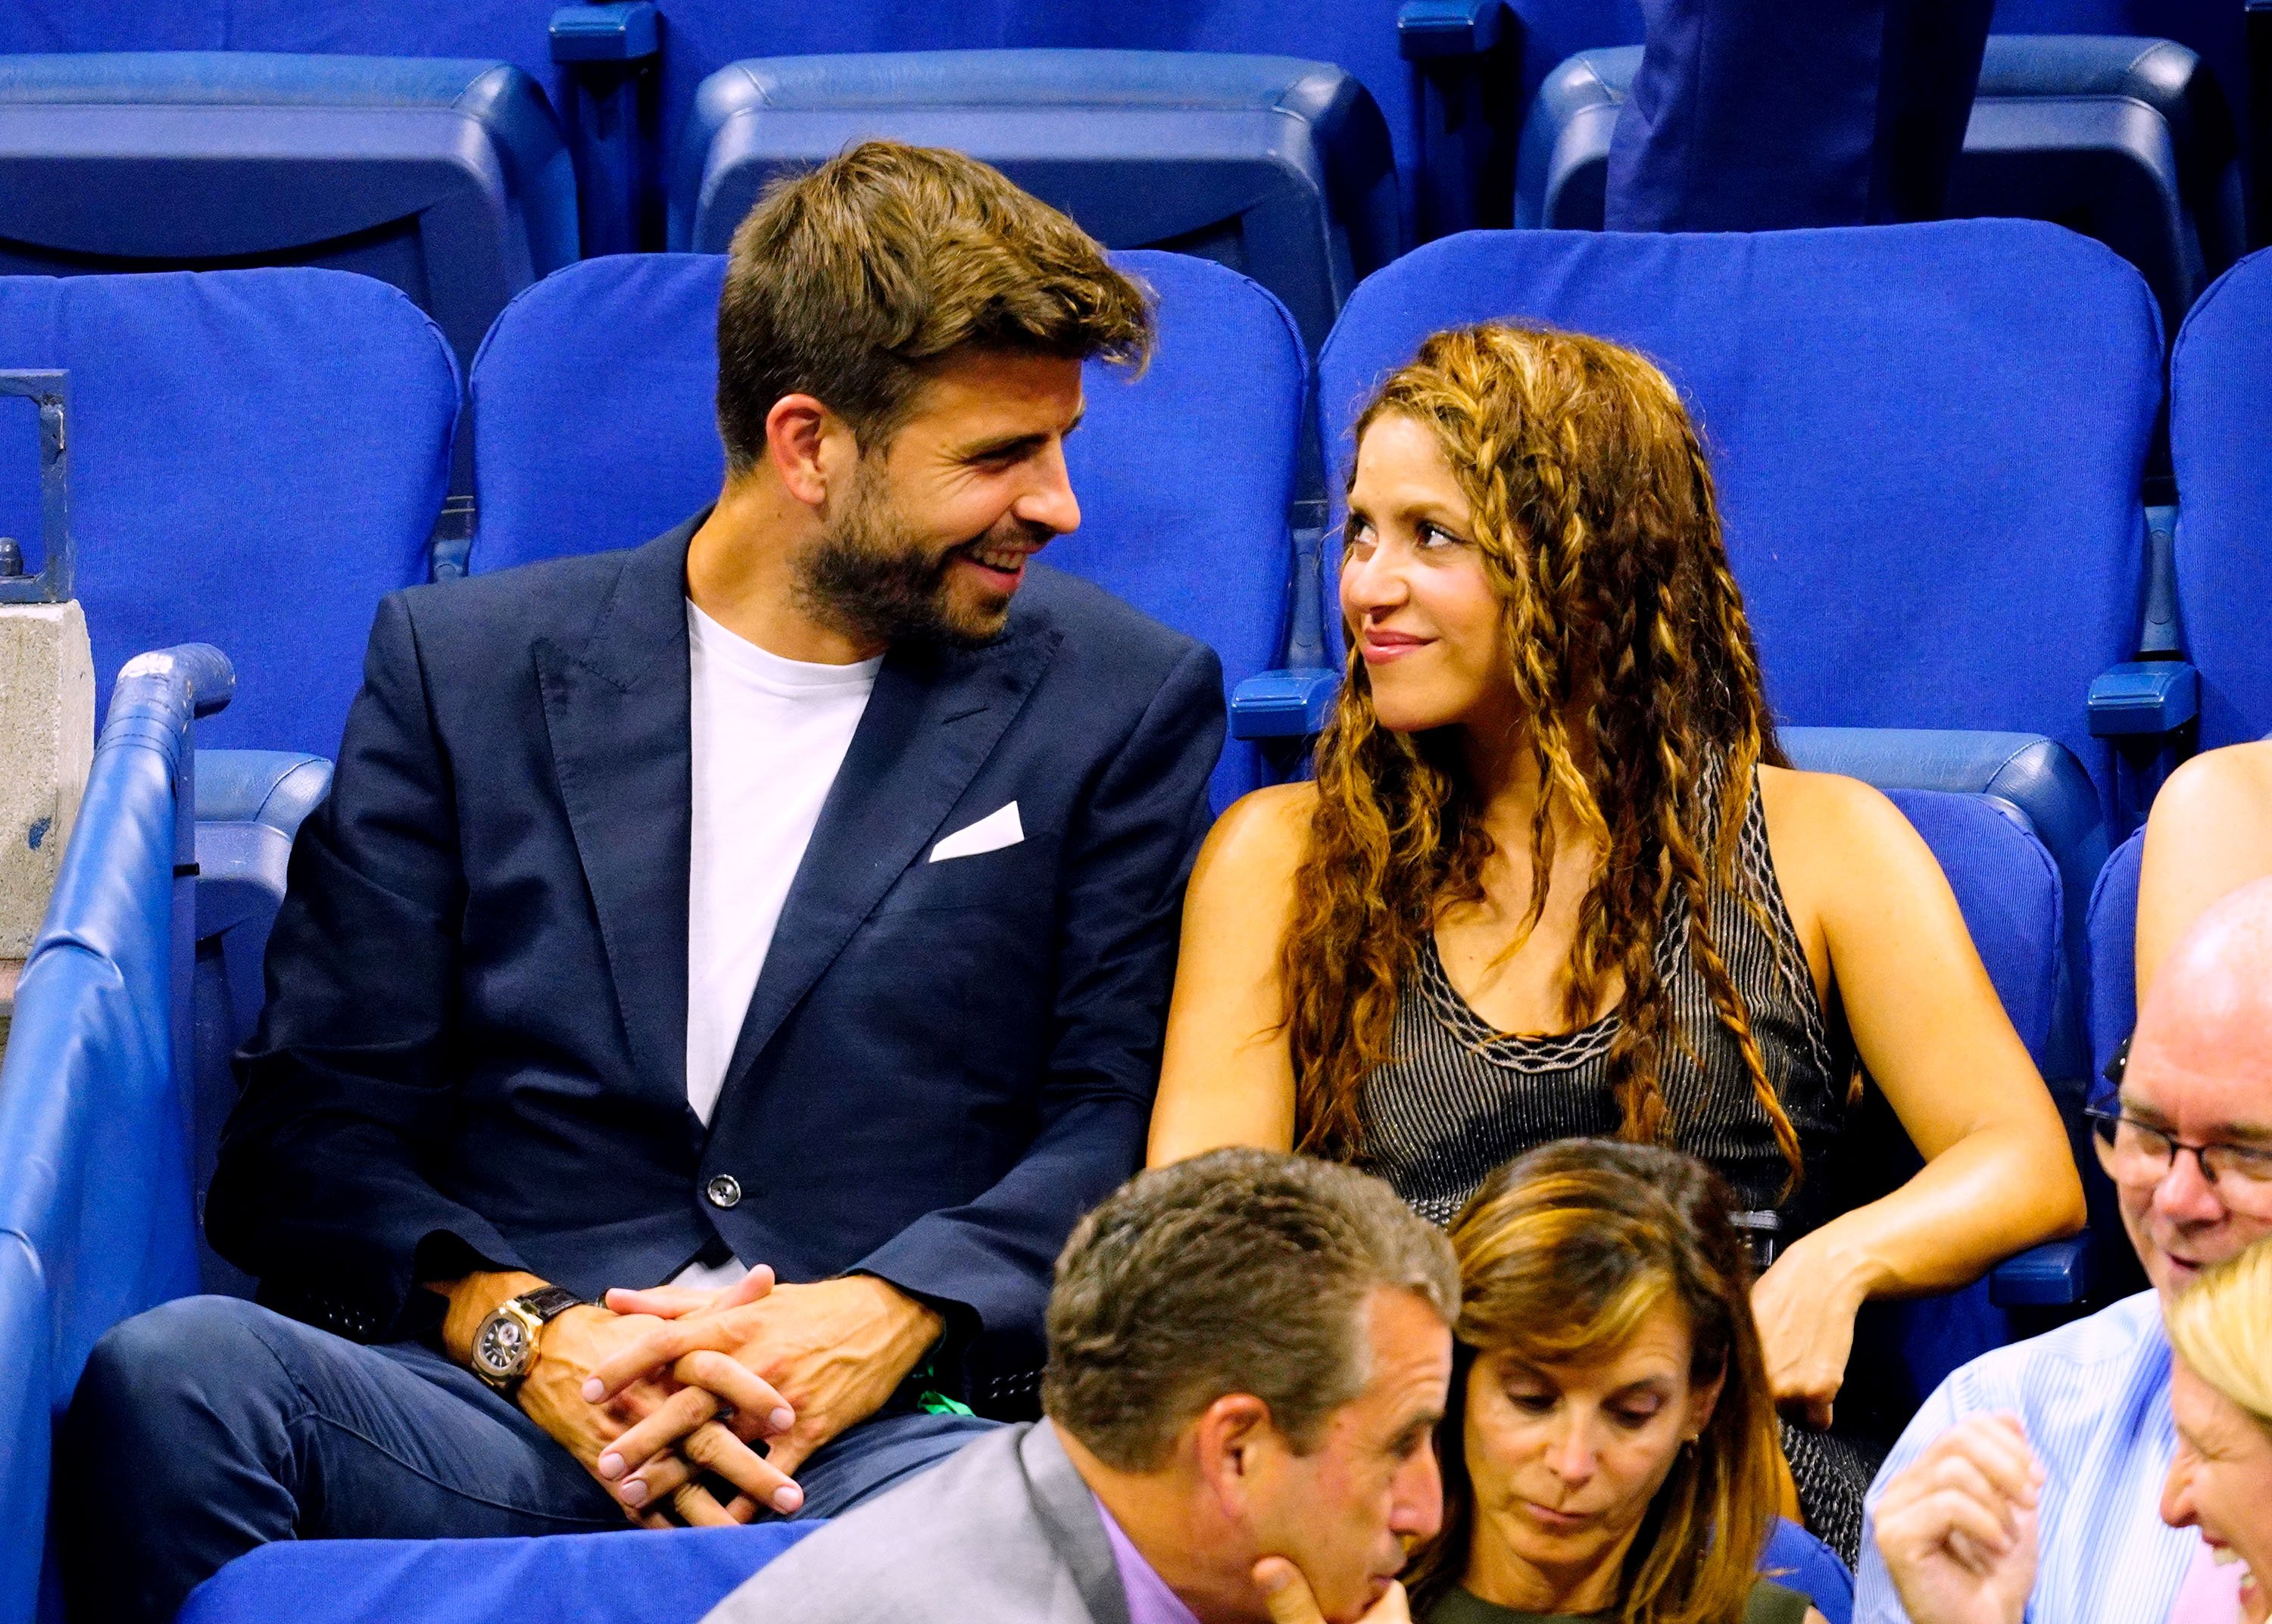 Shakira and Gerard Piqué cheer on Rafael Nadal at the 2019 US Open on September 4, 2019, in New York City. | Source: Getty Images